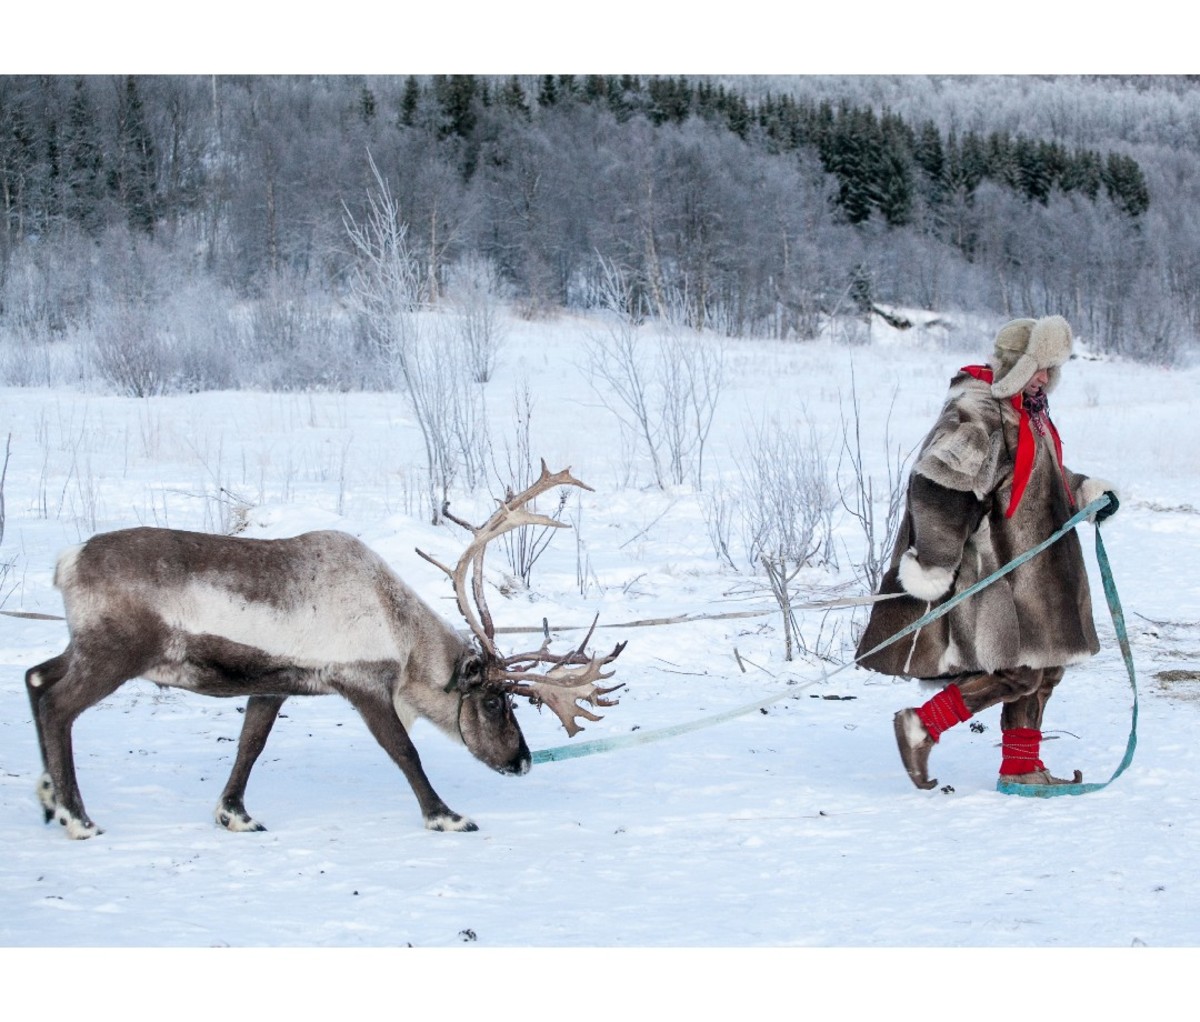 A Sami Native leads a reindeer along a snowy trail in Northern Norway